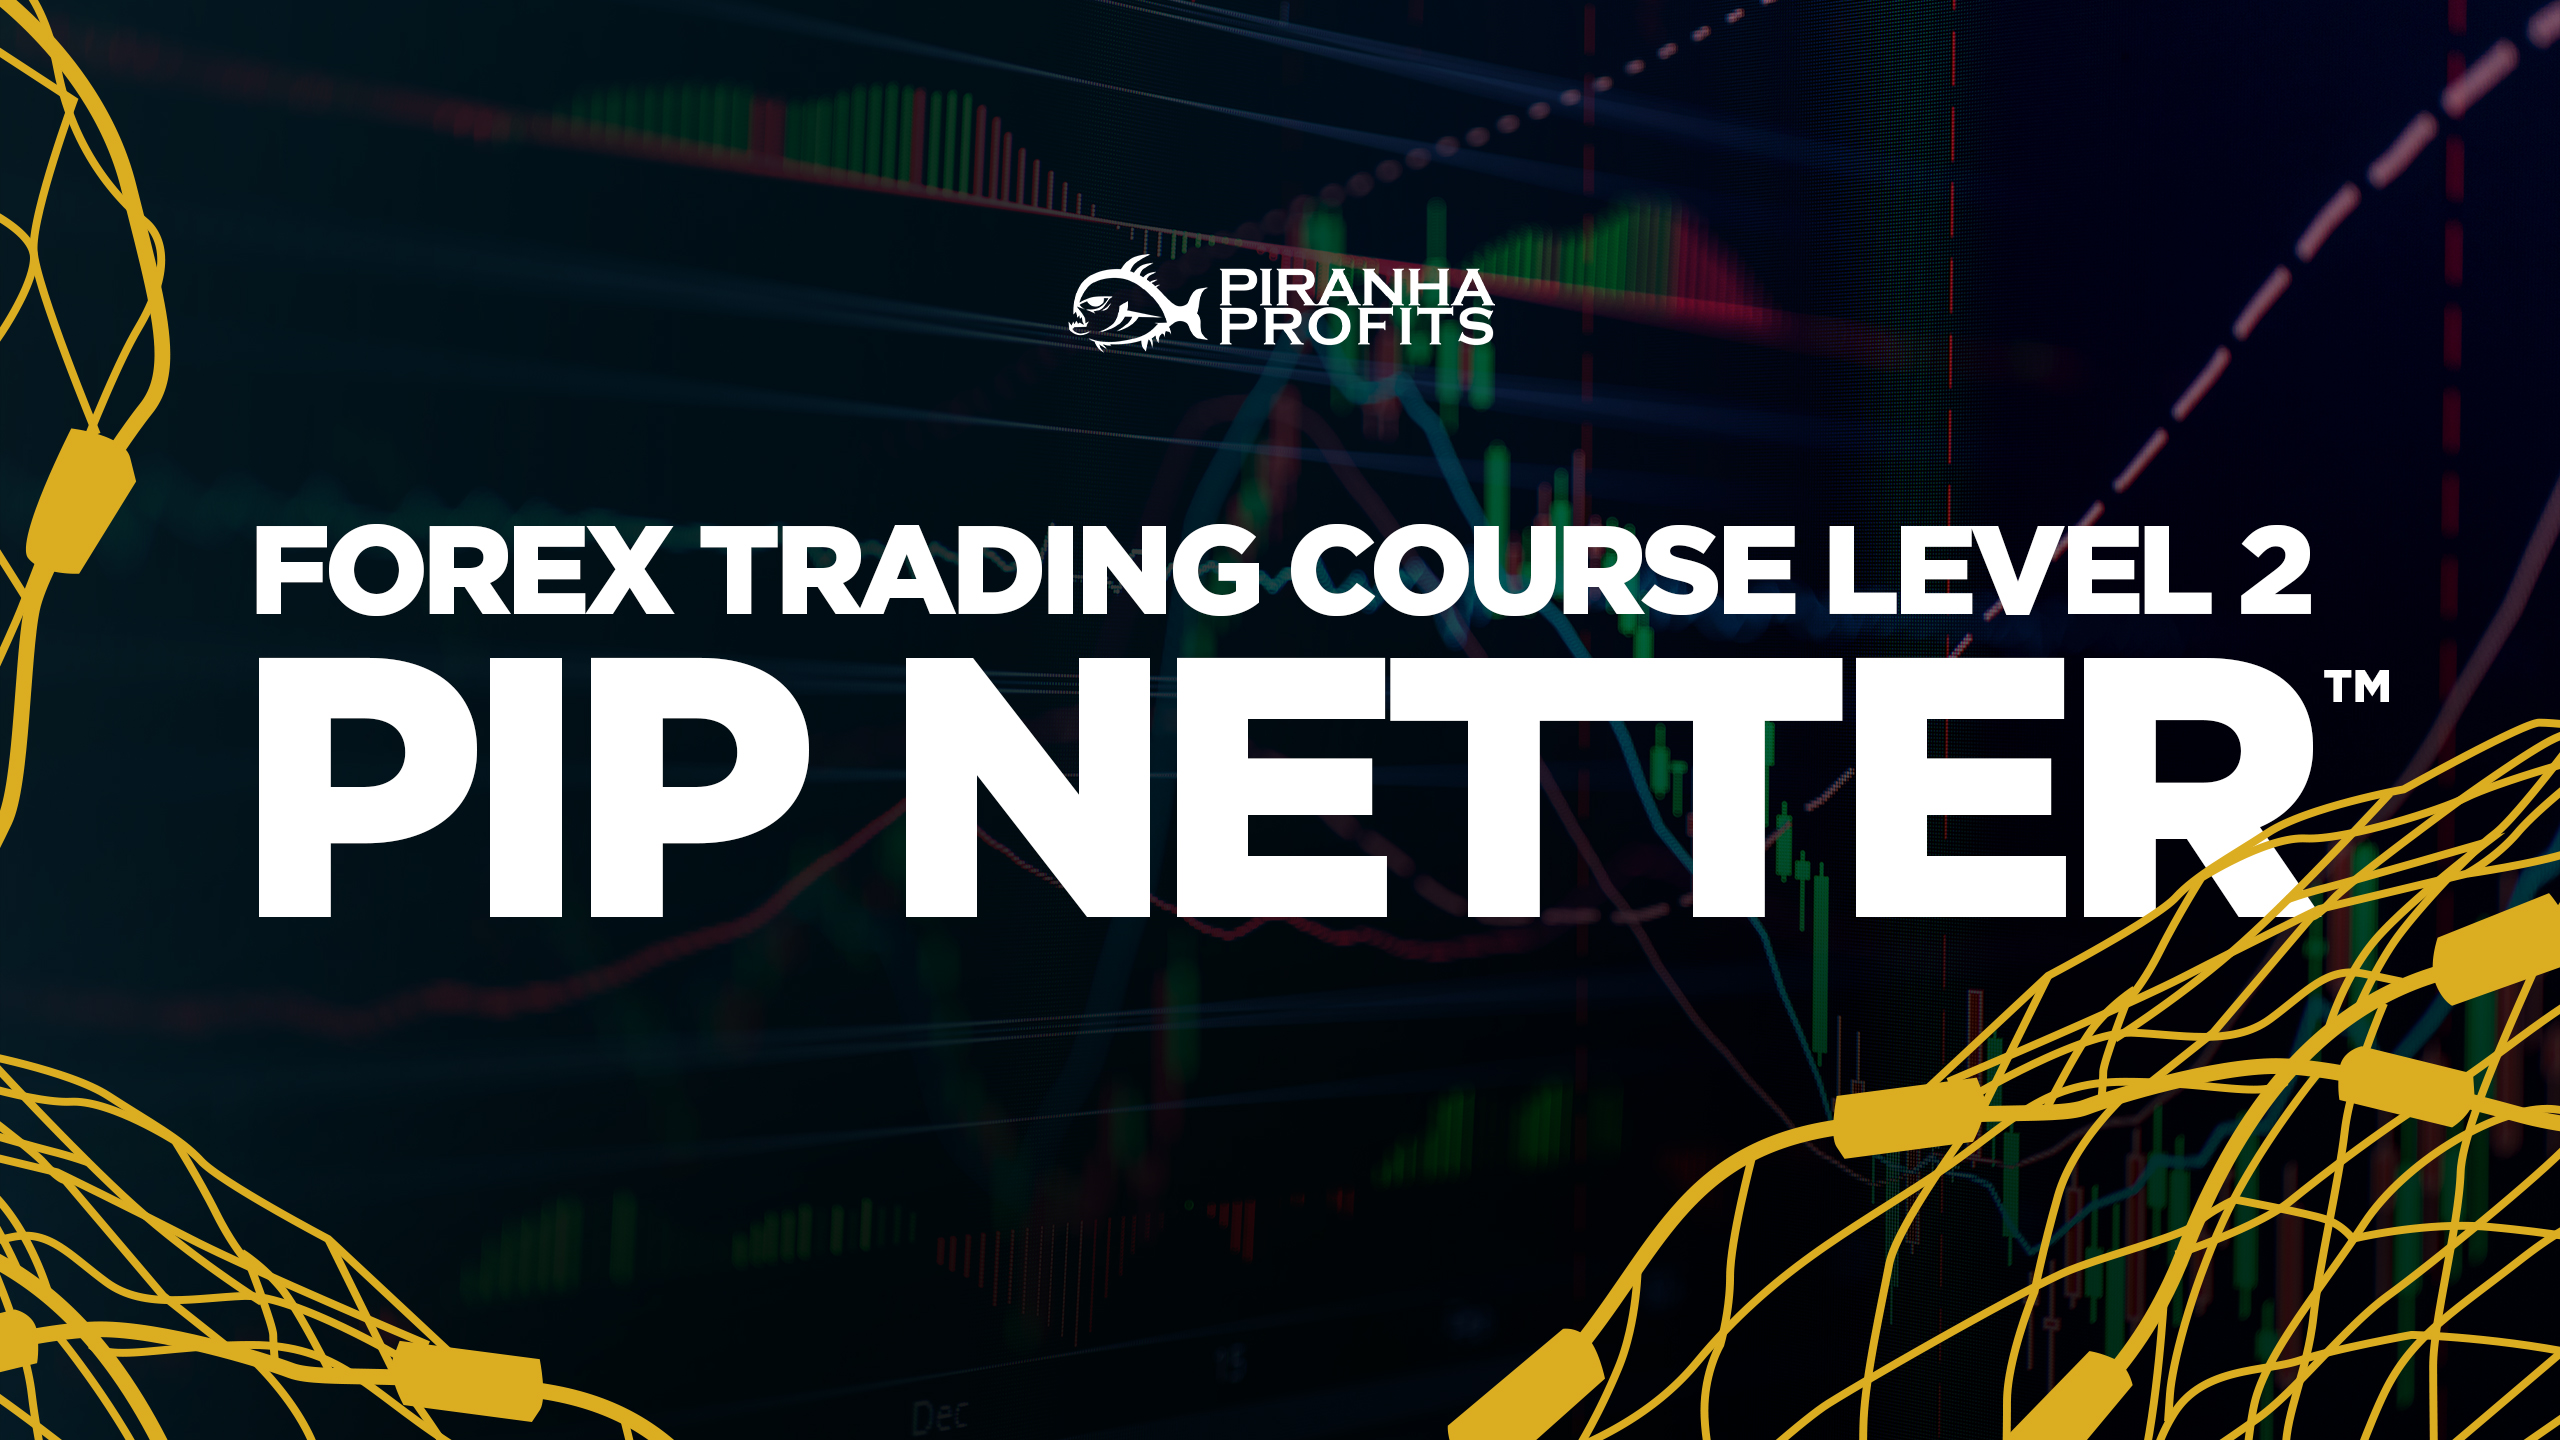 Professional Forex Trading Course Level 2: Pip Netter™ | Piranha